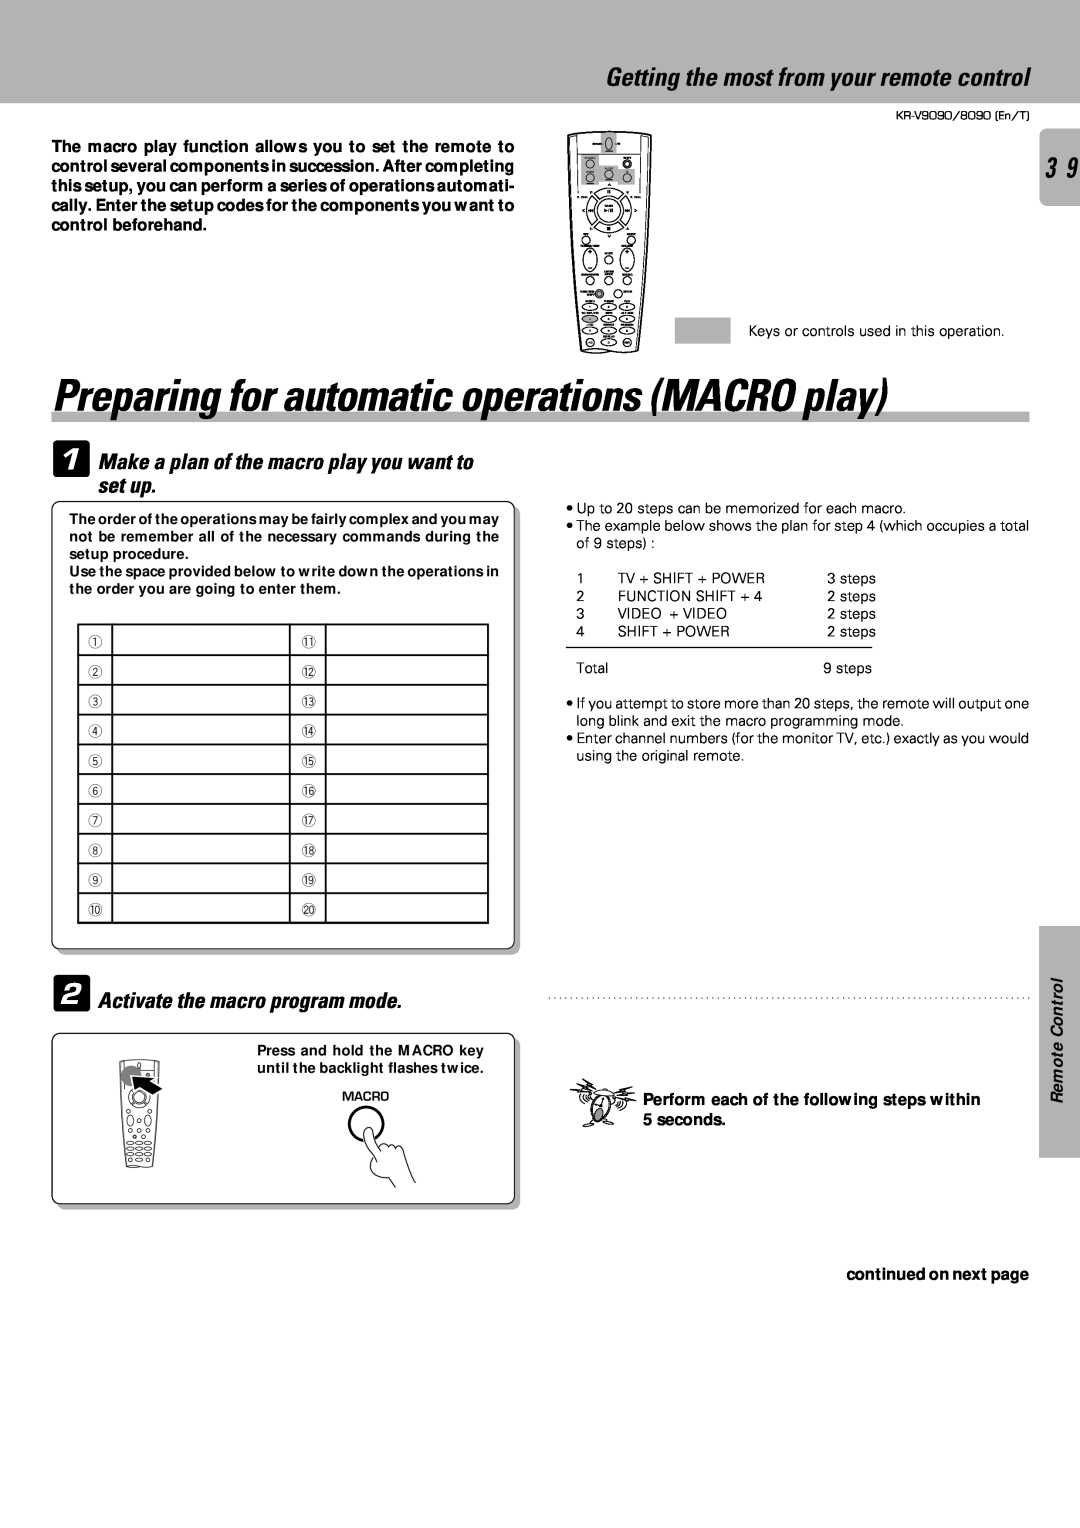 Kenwood KR-V8090 Preparing for automatic operations MACRO play, 1Make a plan of the macro play you want to set up 